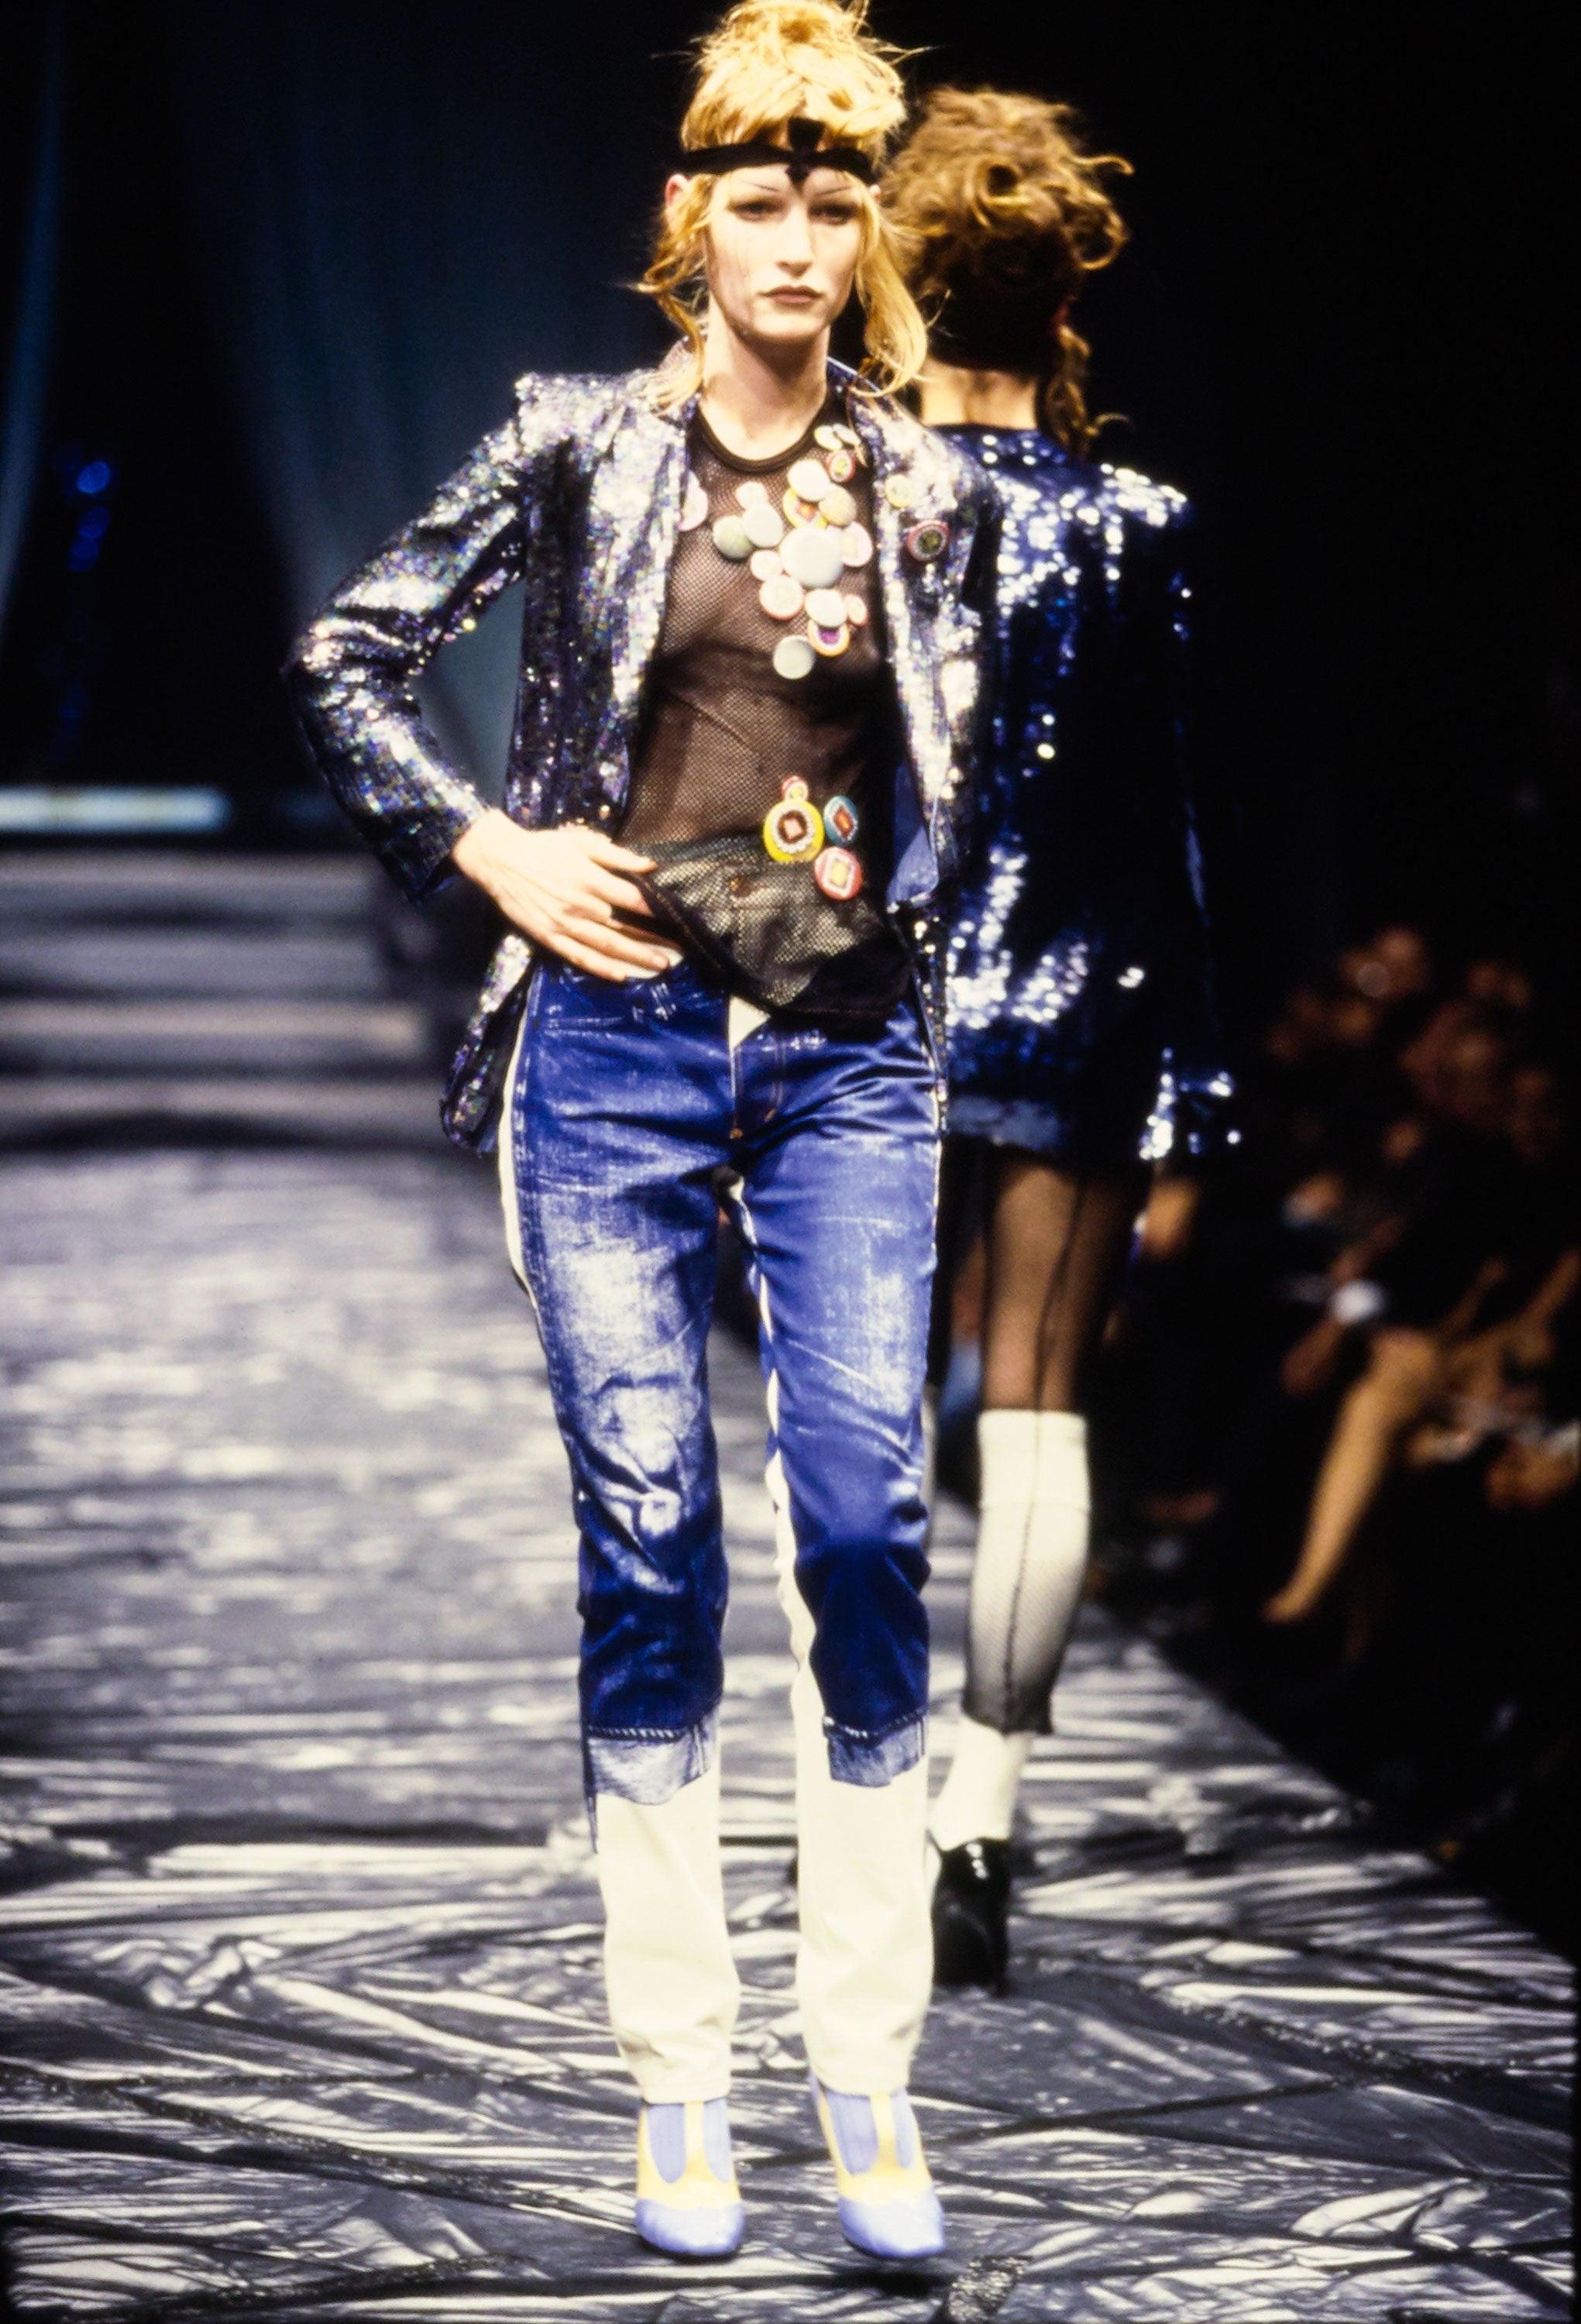 Dating to the S/S 1997 runway collection, these Gaultier Jeans by Jean Paul Gaultier pants are a perfect example of Gaultier's ability to turn everyday fashion into art. They are a high-waisted and straight legged-style, and feature a stunning